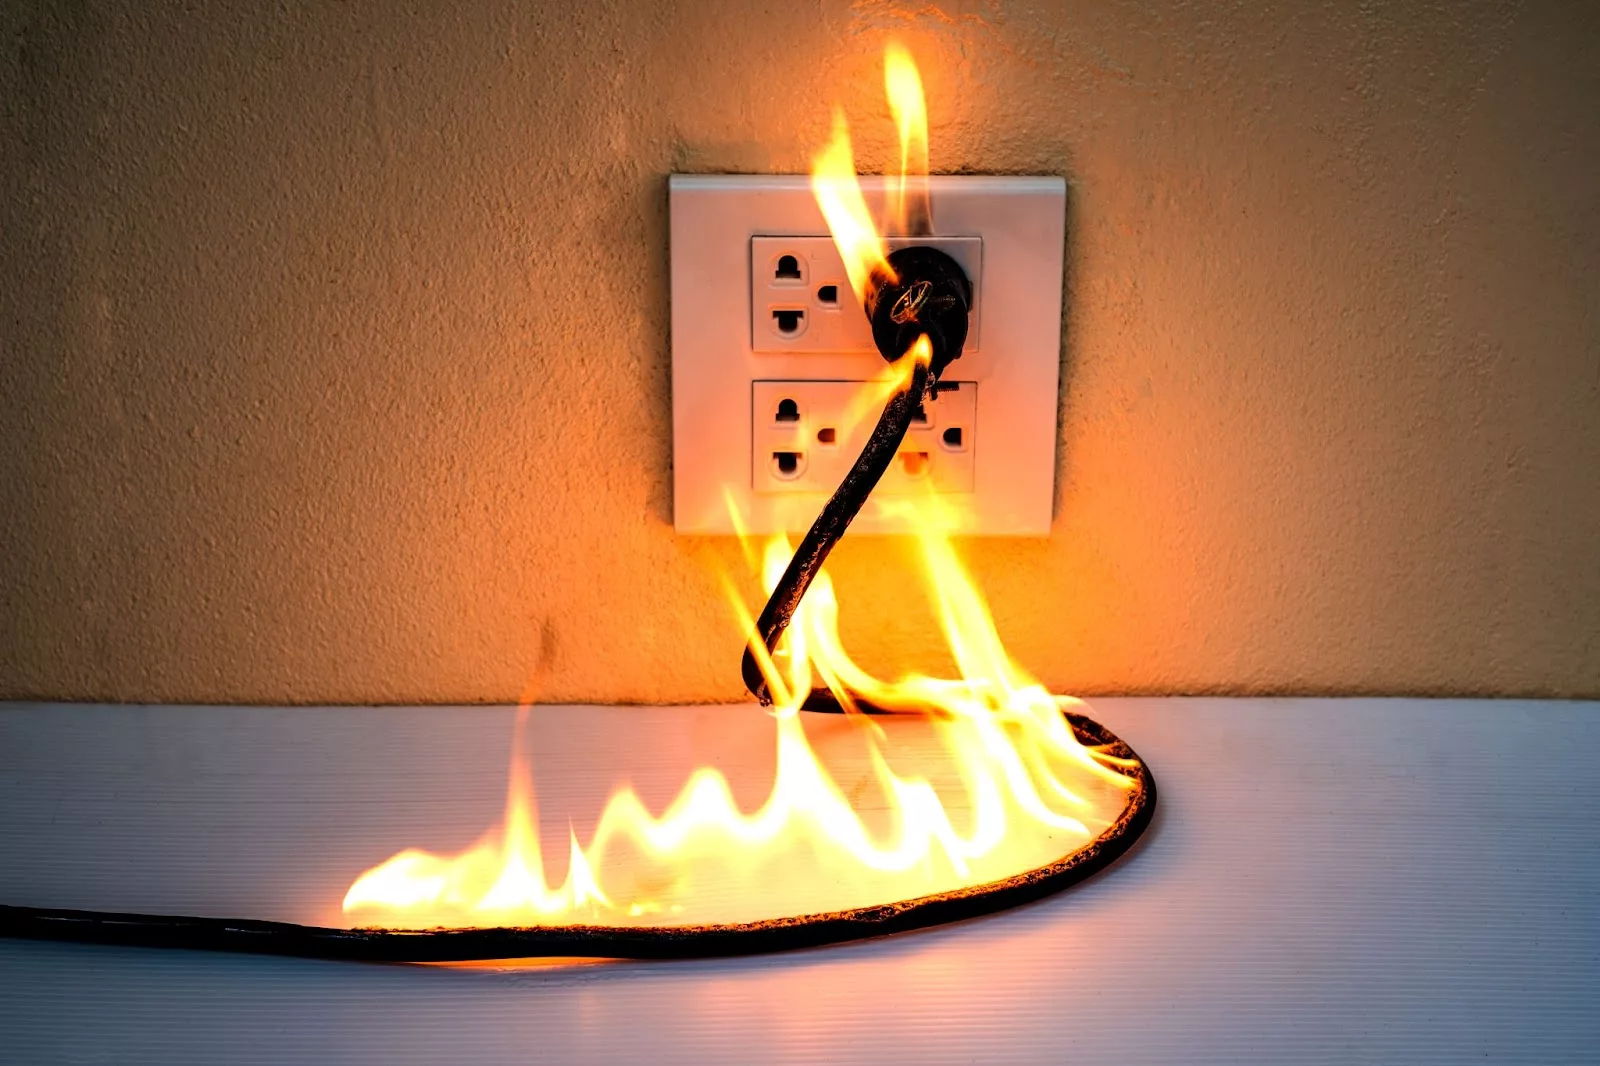 An electrical outlet with flames emerging from a plugged-in cord, illustrating the danger of electrical fires in a home. This image could serve as a cautionary visual for an article titled 'Safeguarding Your Home: A Comprehensive Guide to Preventing Electrical Fires,' emphasizing the importance of electrical safety and fire prevention methods.